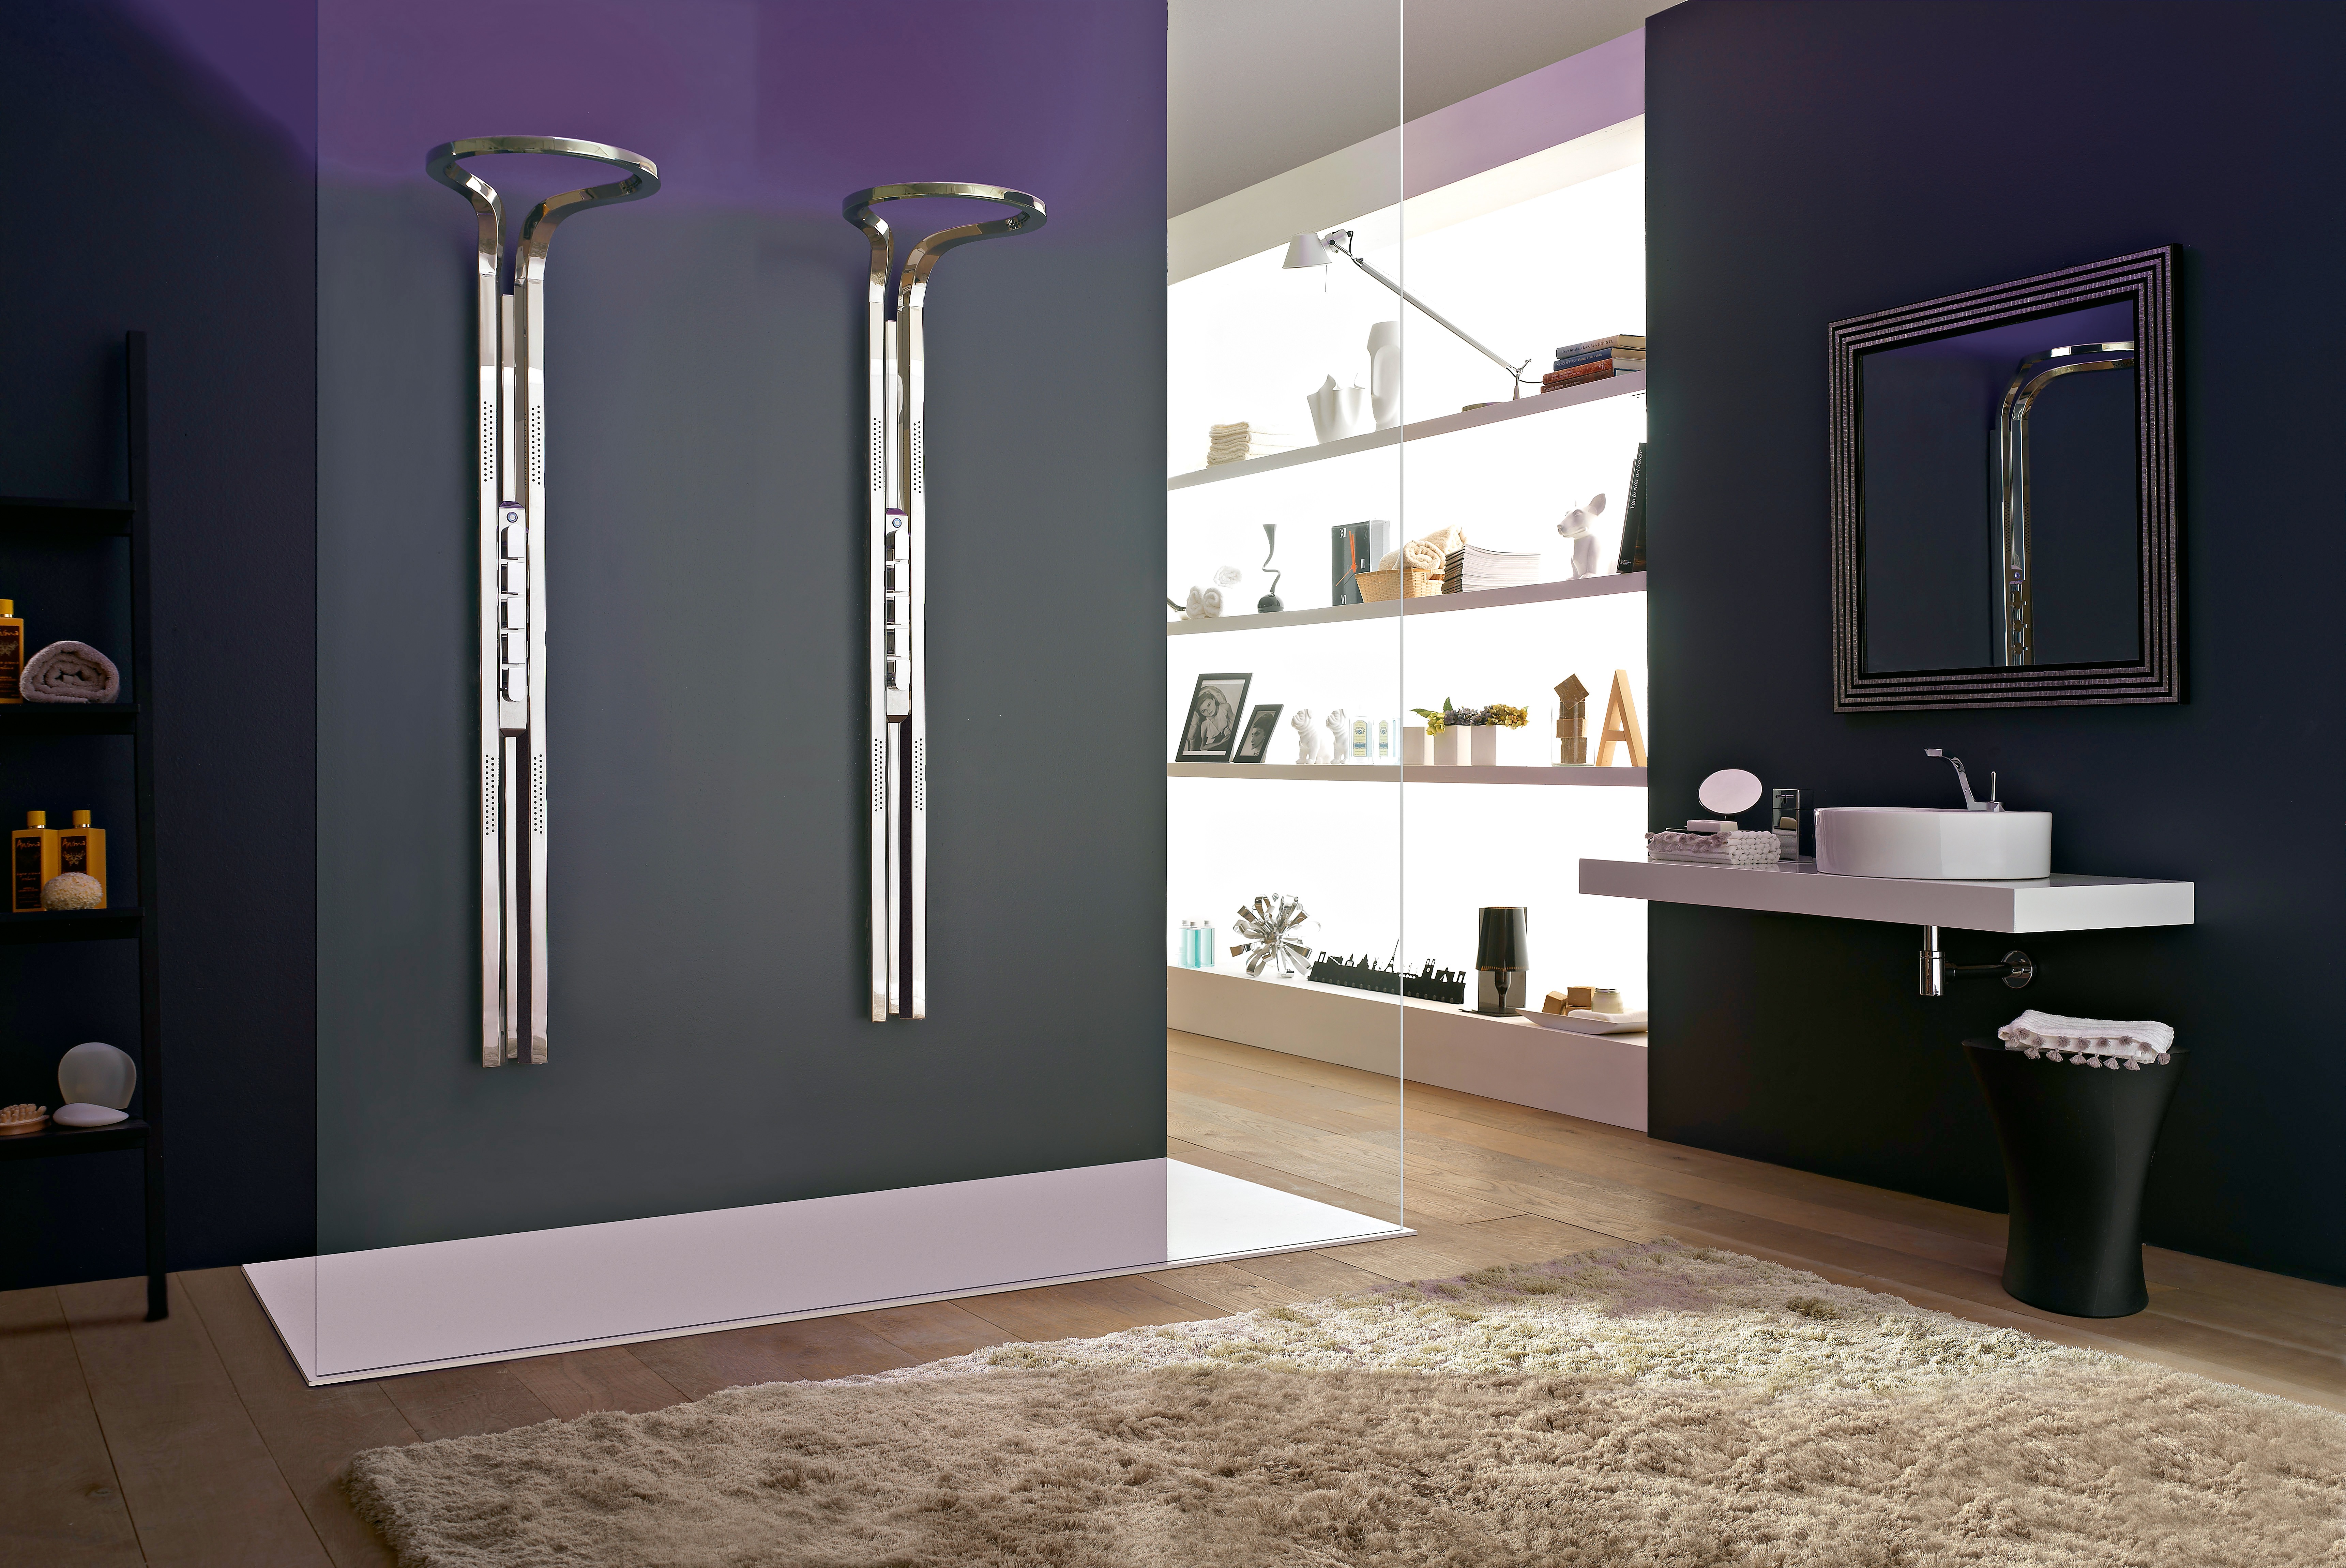 graff shower and bathroom fixtures on display at the immerse showroom